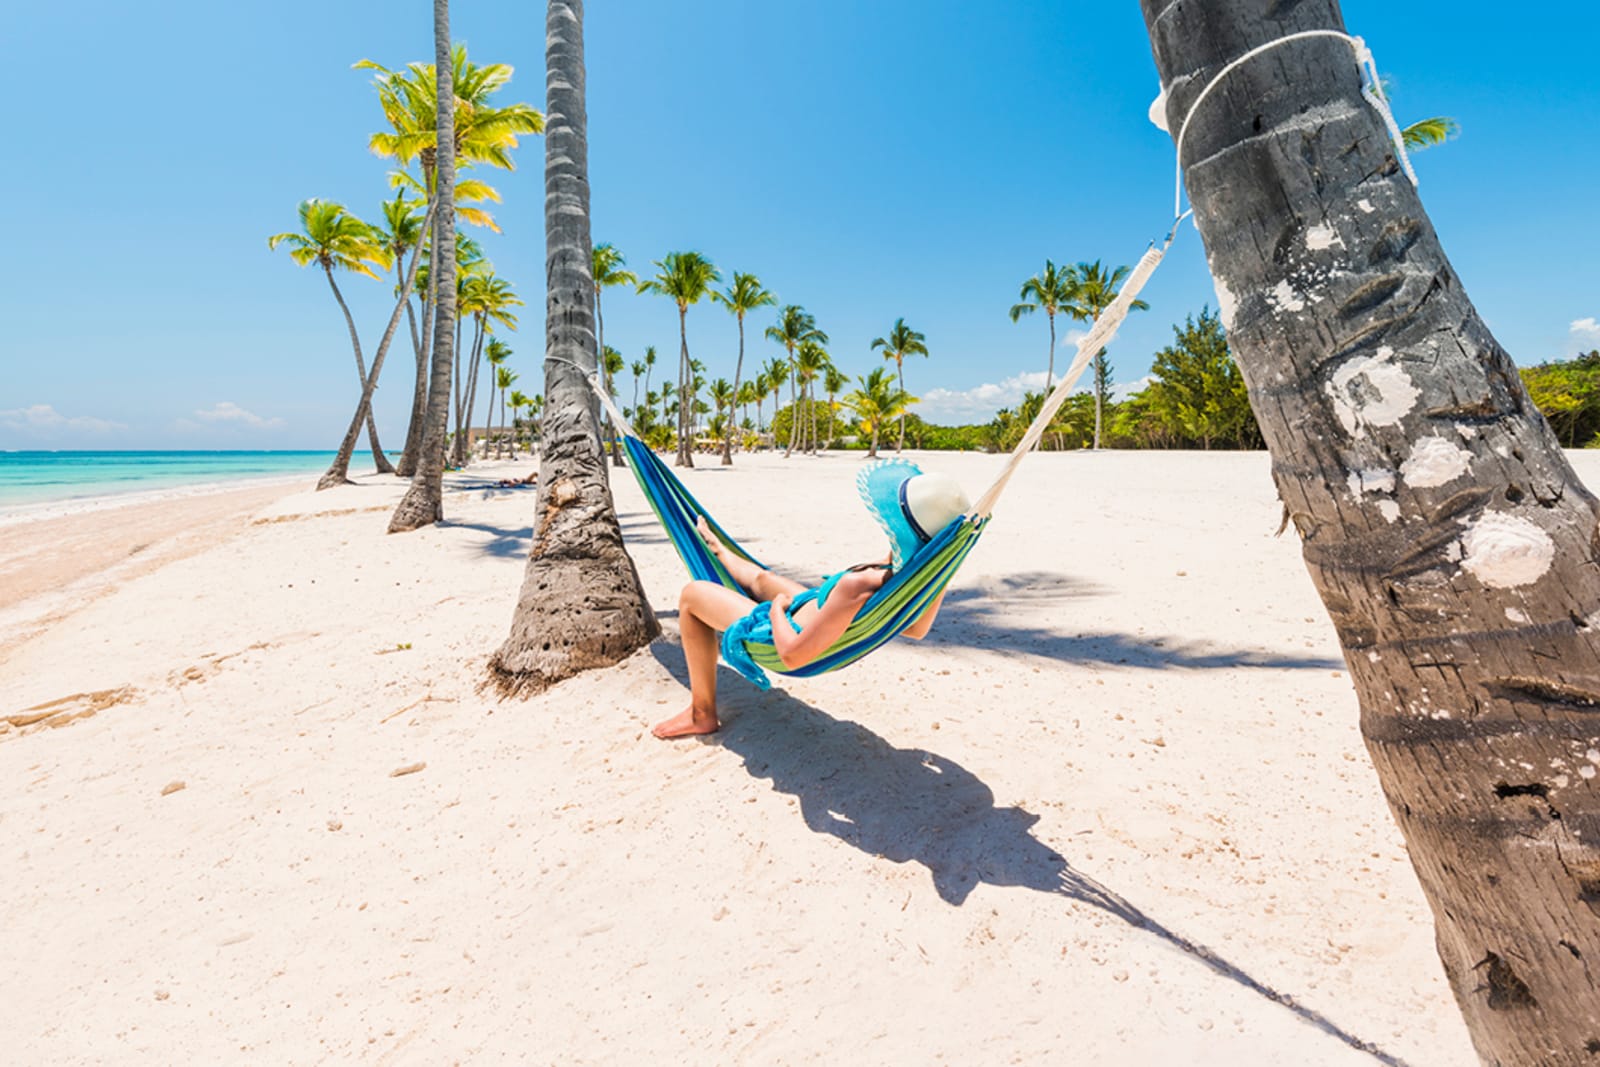 A traveller relaxing in a hammock on a beach in Punta Cana, Dominican Republic